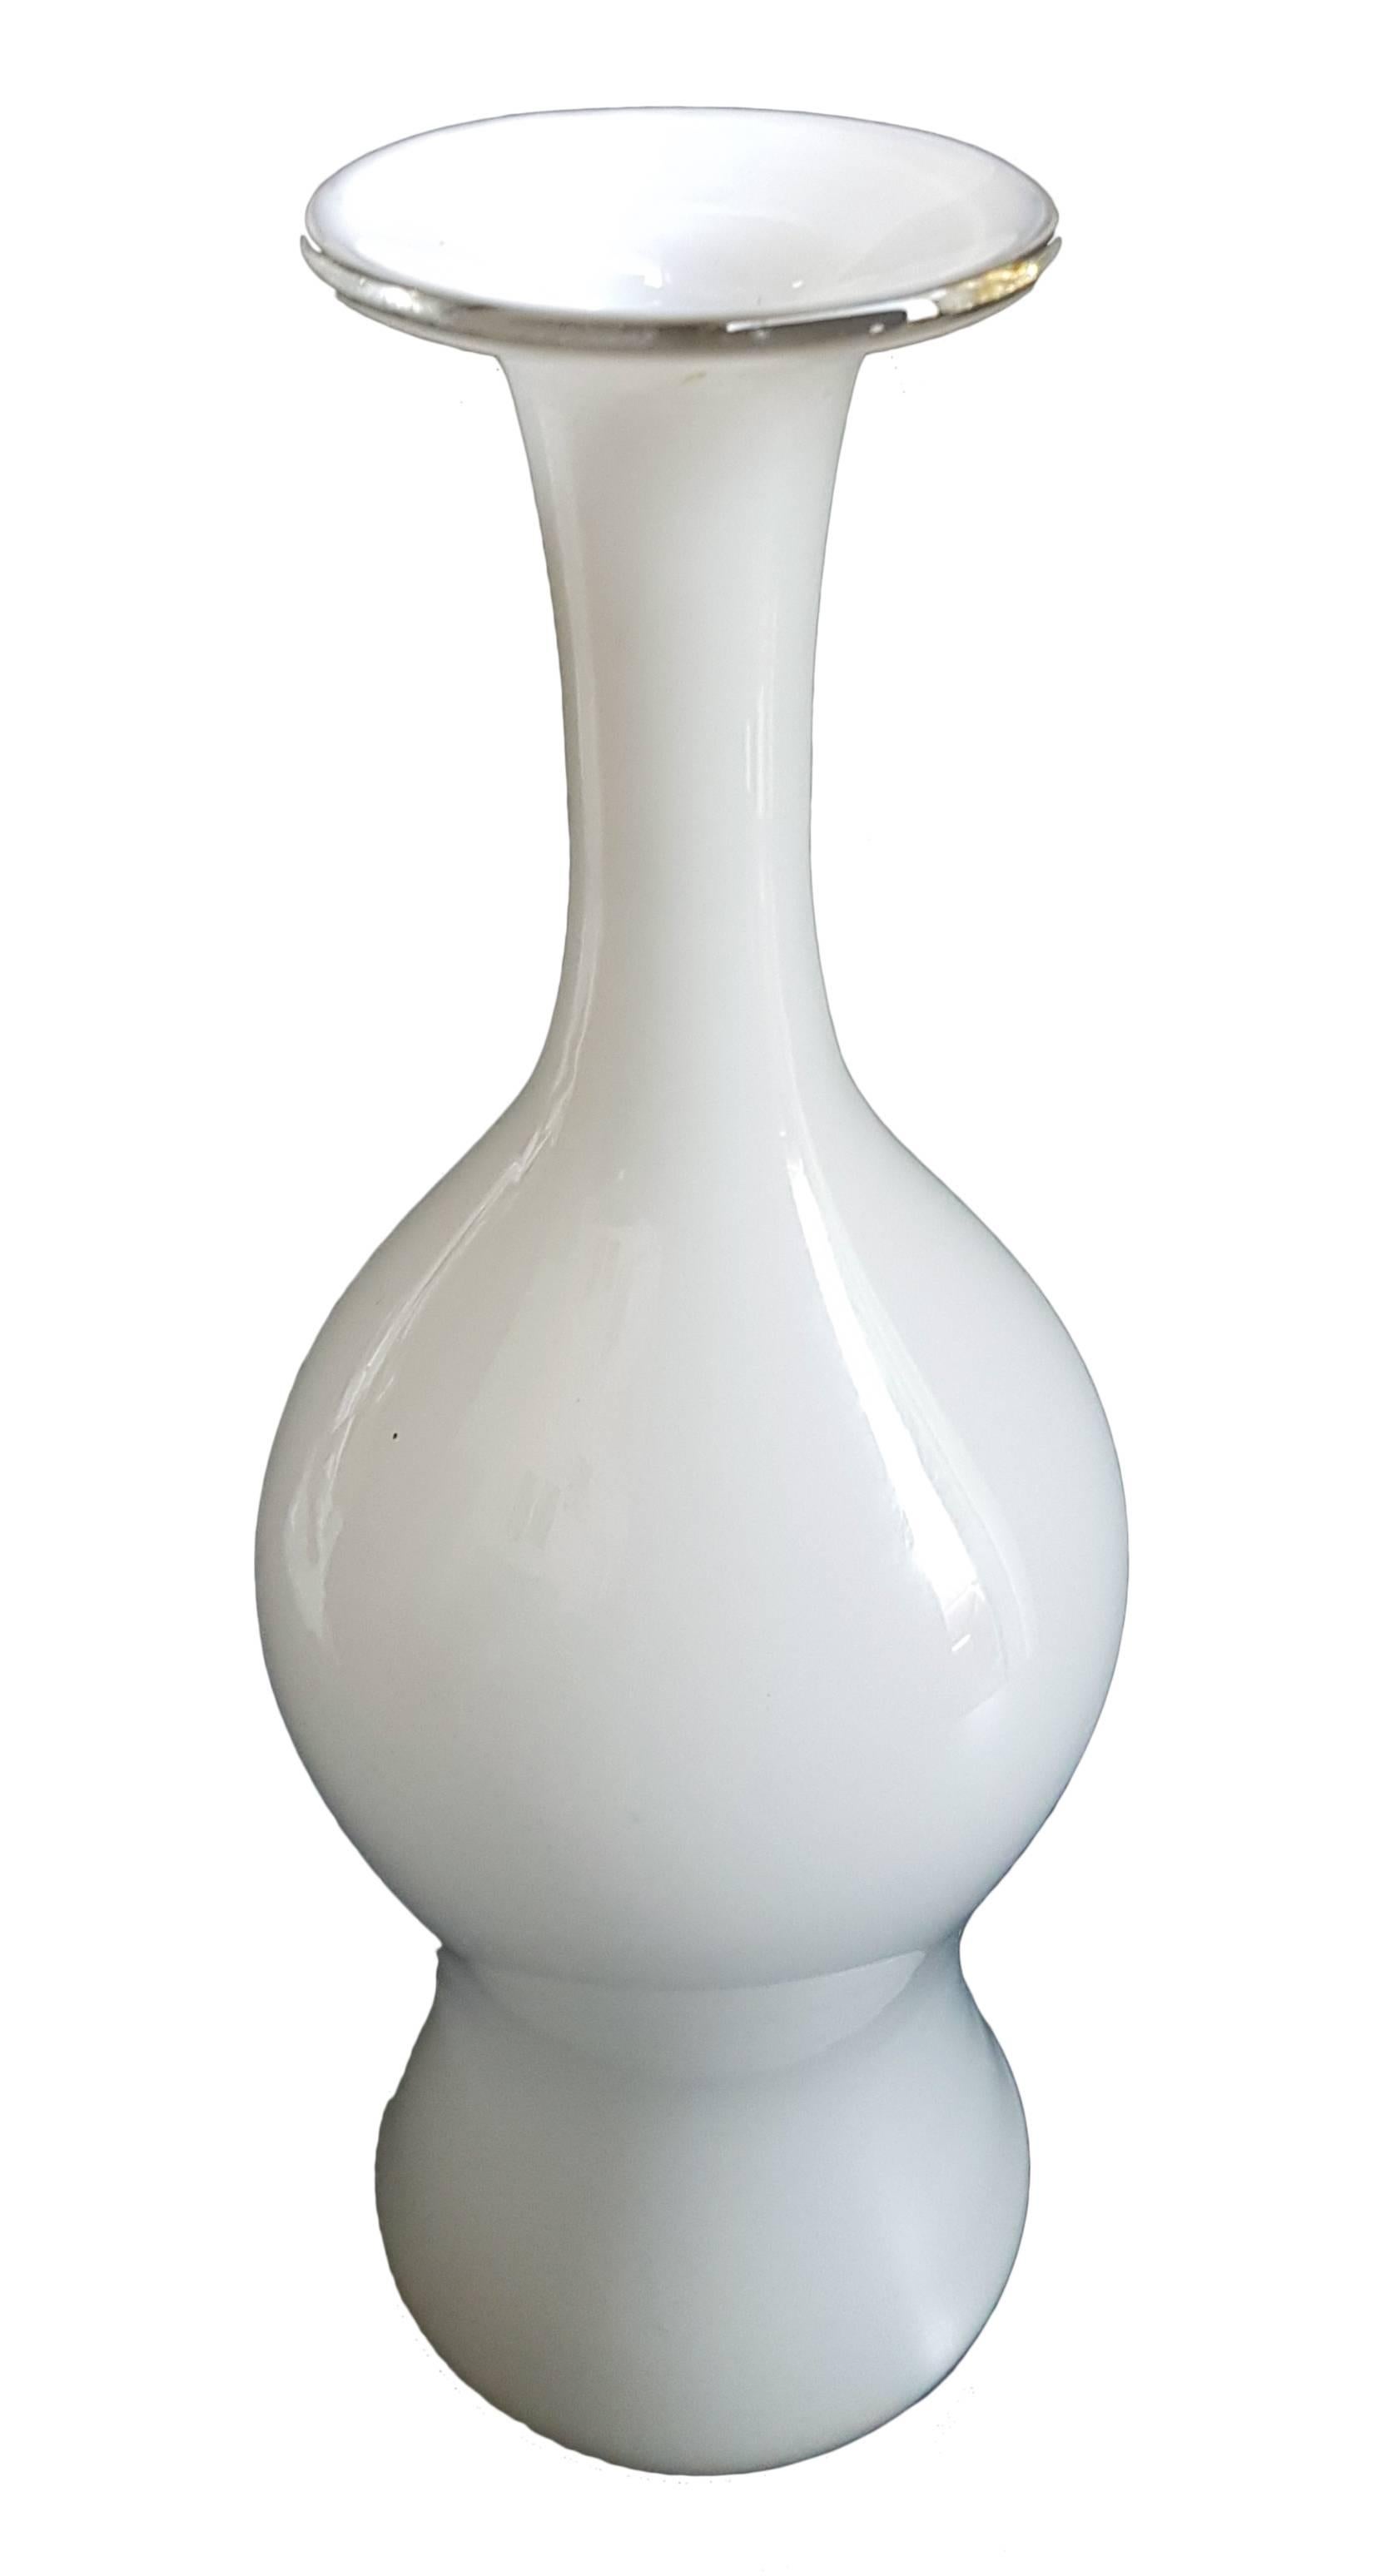 Very rare vase designed by Paolo Venini in cased glass, white and glossy, a must for Murano glass collectors.
The item also displays a circular trademark 